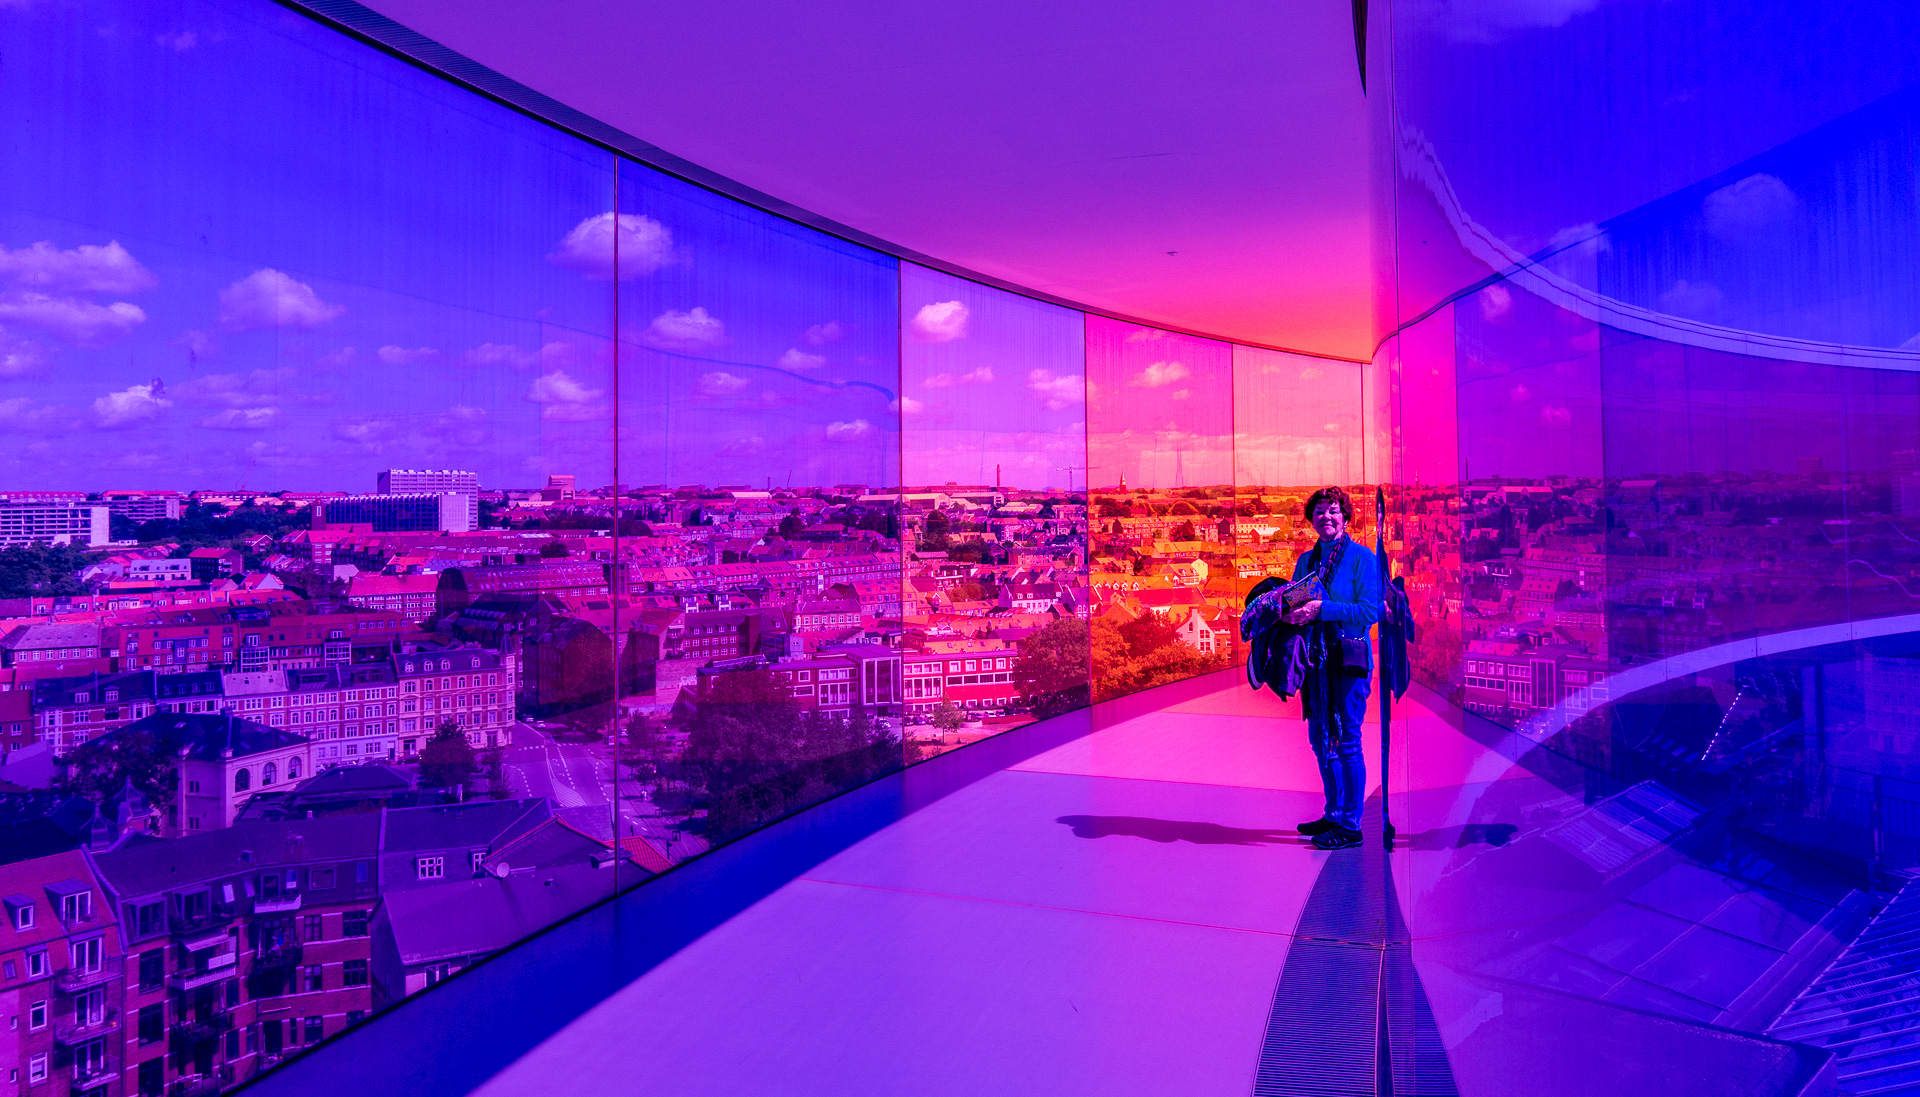 The Rainbow Panorama walkway atop the art museum in Aarhus, Denmark. Sunlight through the colored glass panes makes really bright colors.